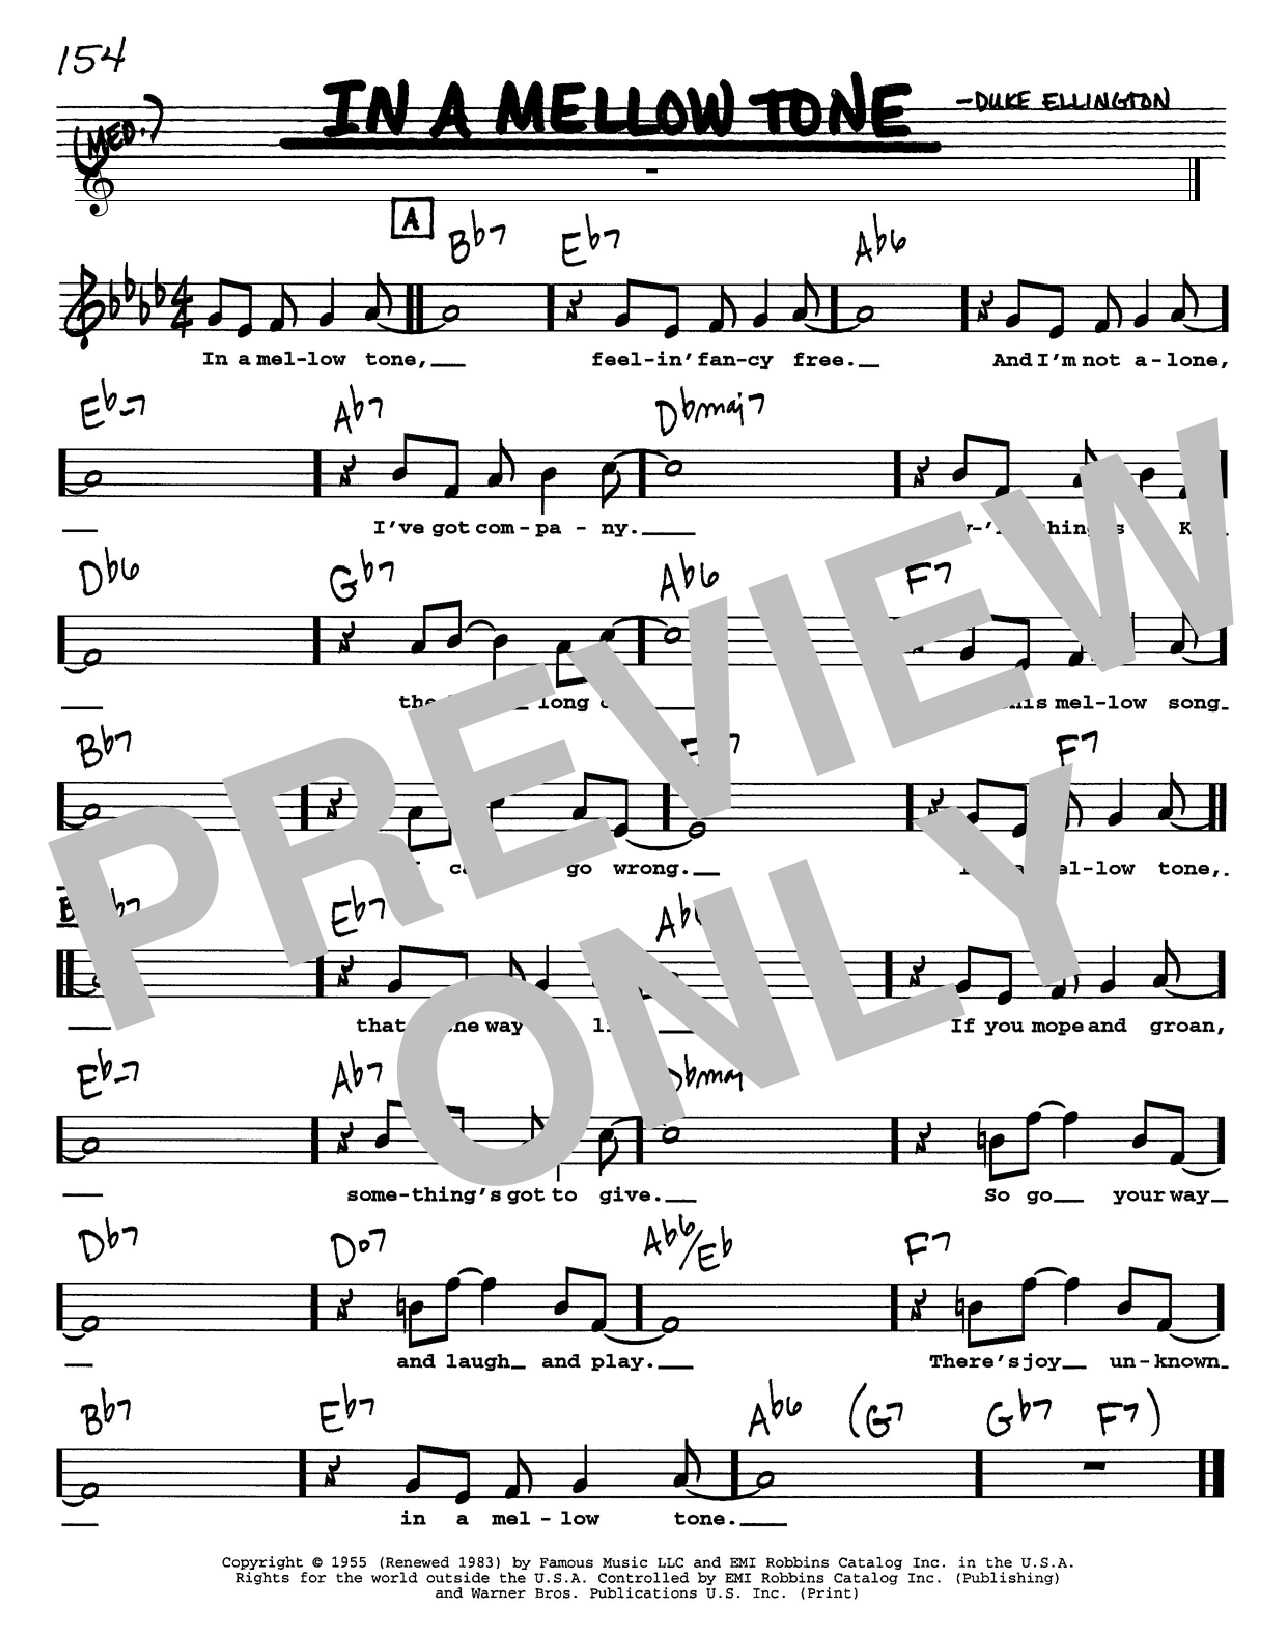 Duke Ellington In A Mellow Tone sheet music notes and chords. Download Printable PDF.